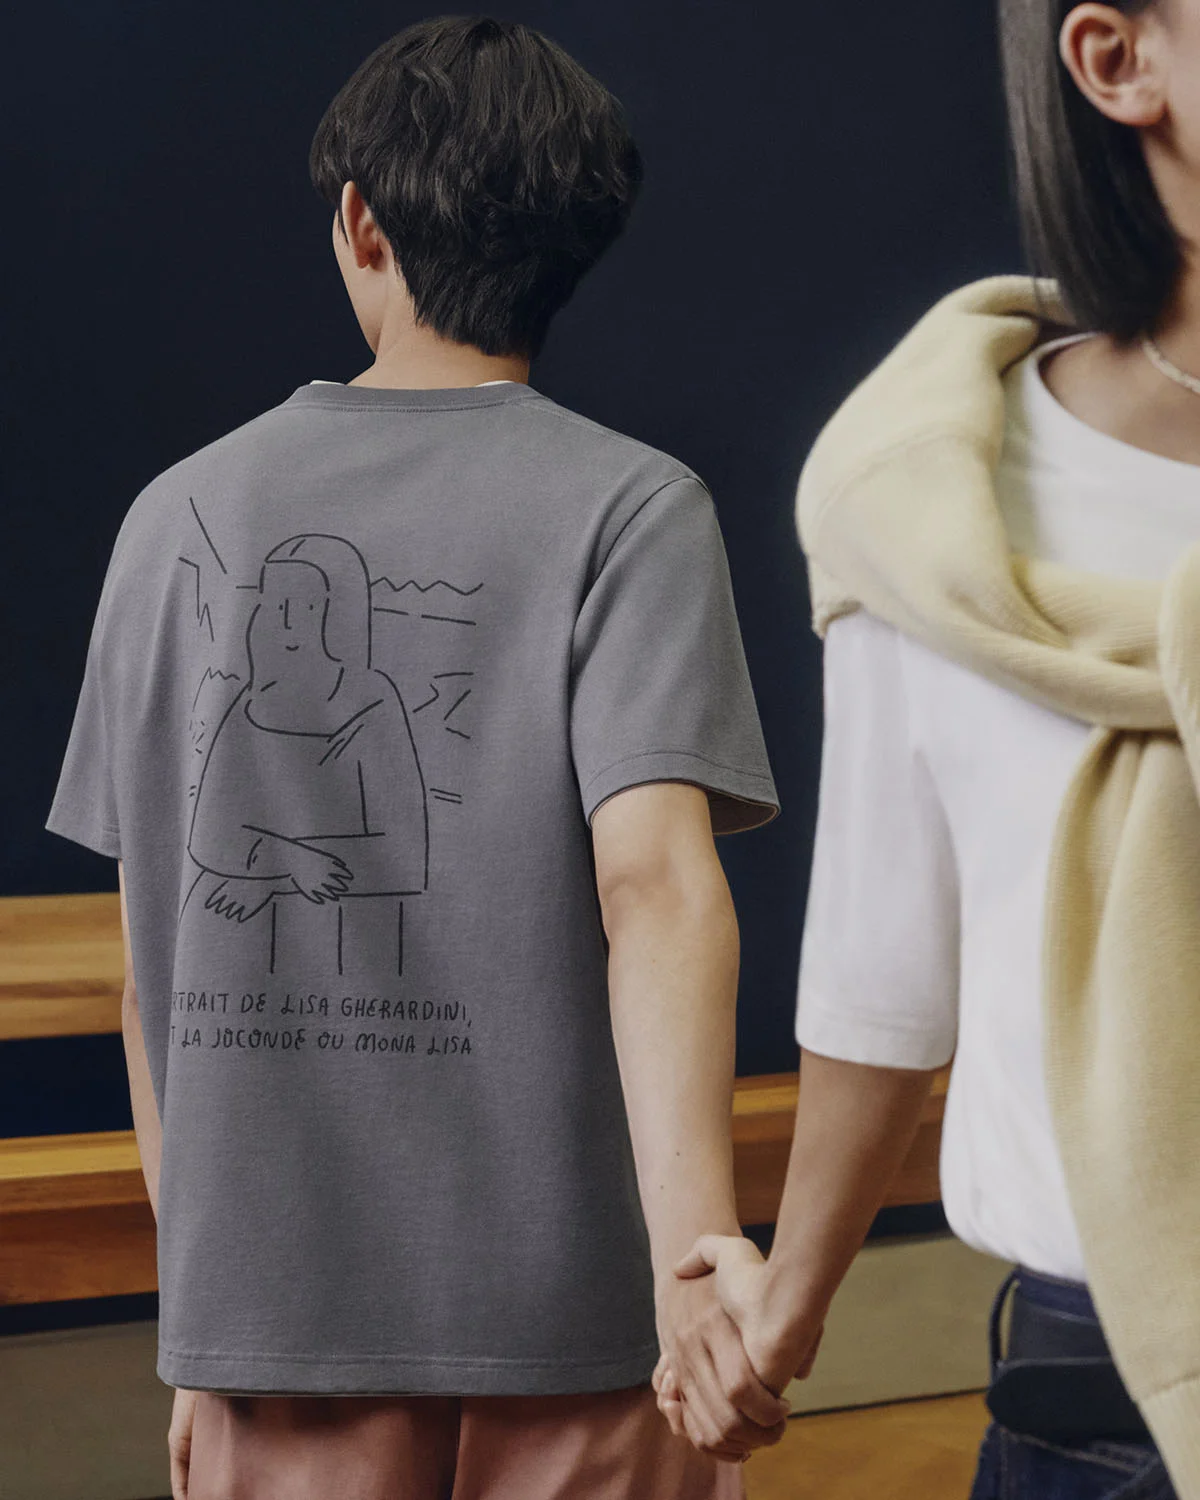 The new Uniqlo x Louvre Museum collab seen by the artist Yu Nabaga